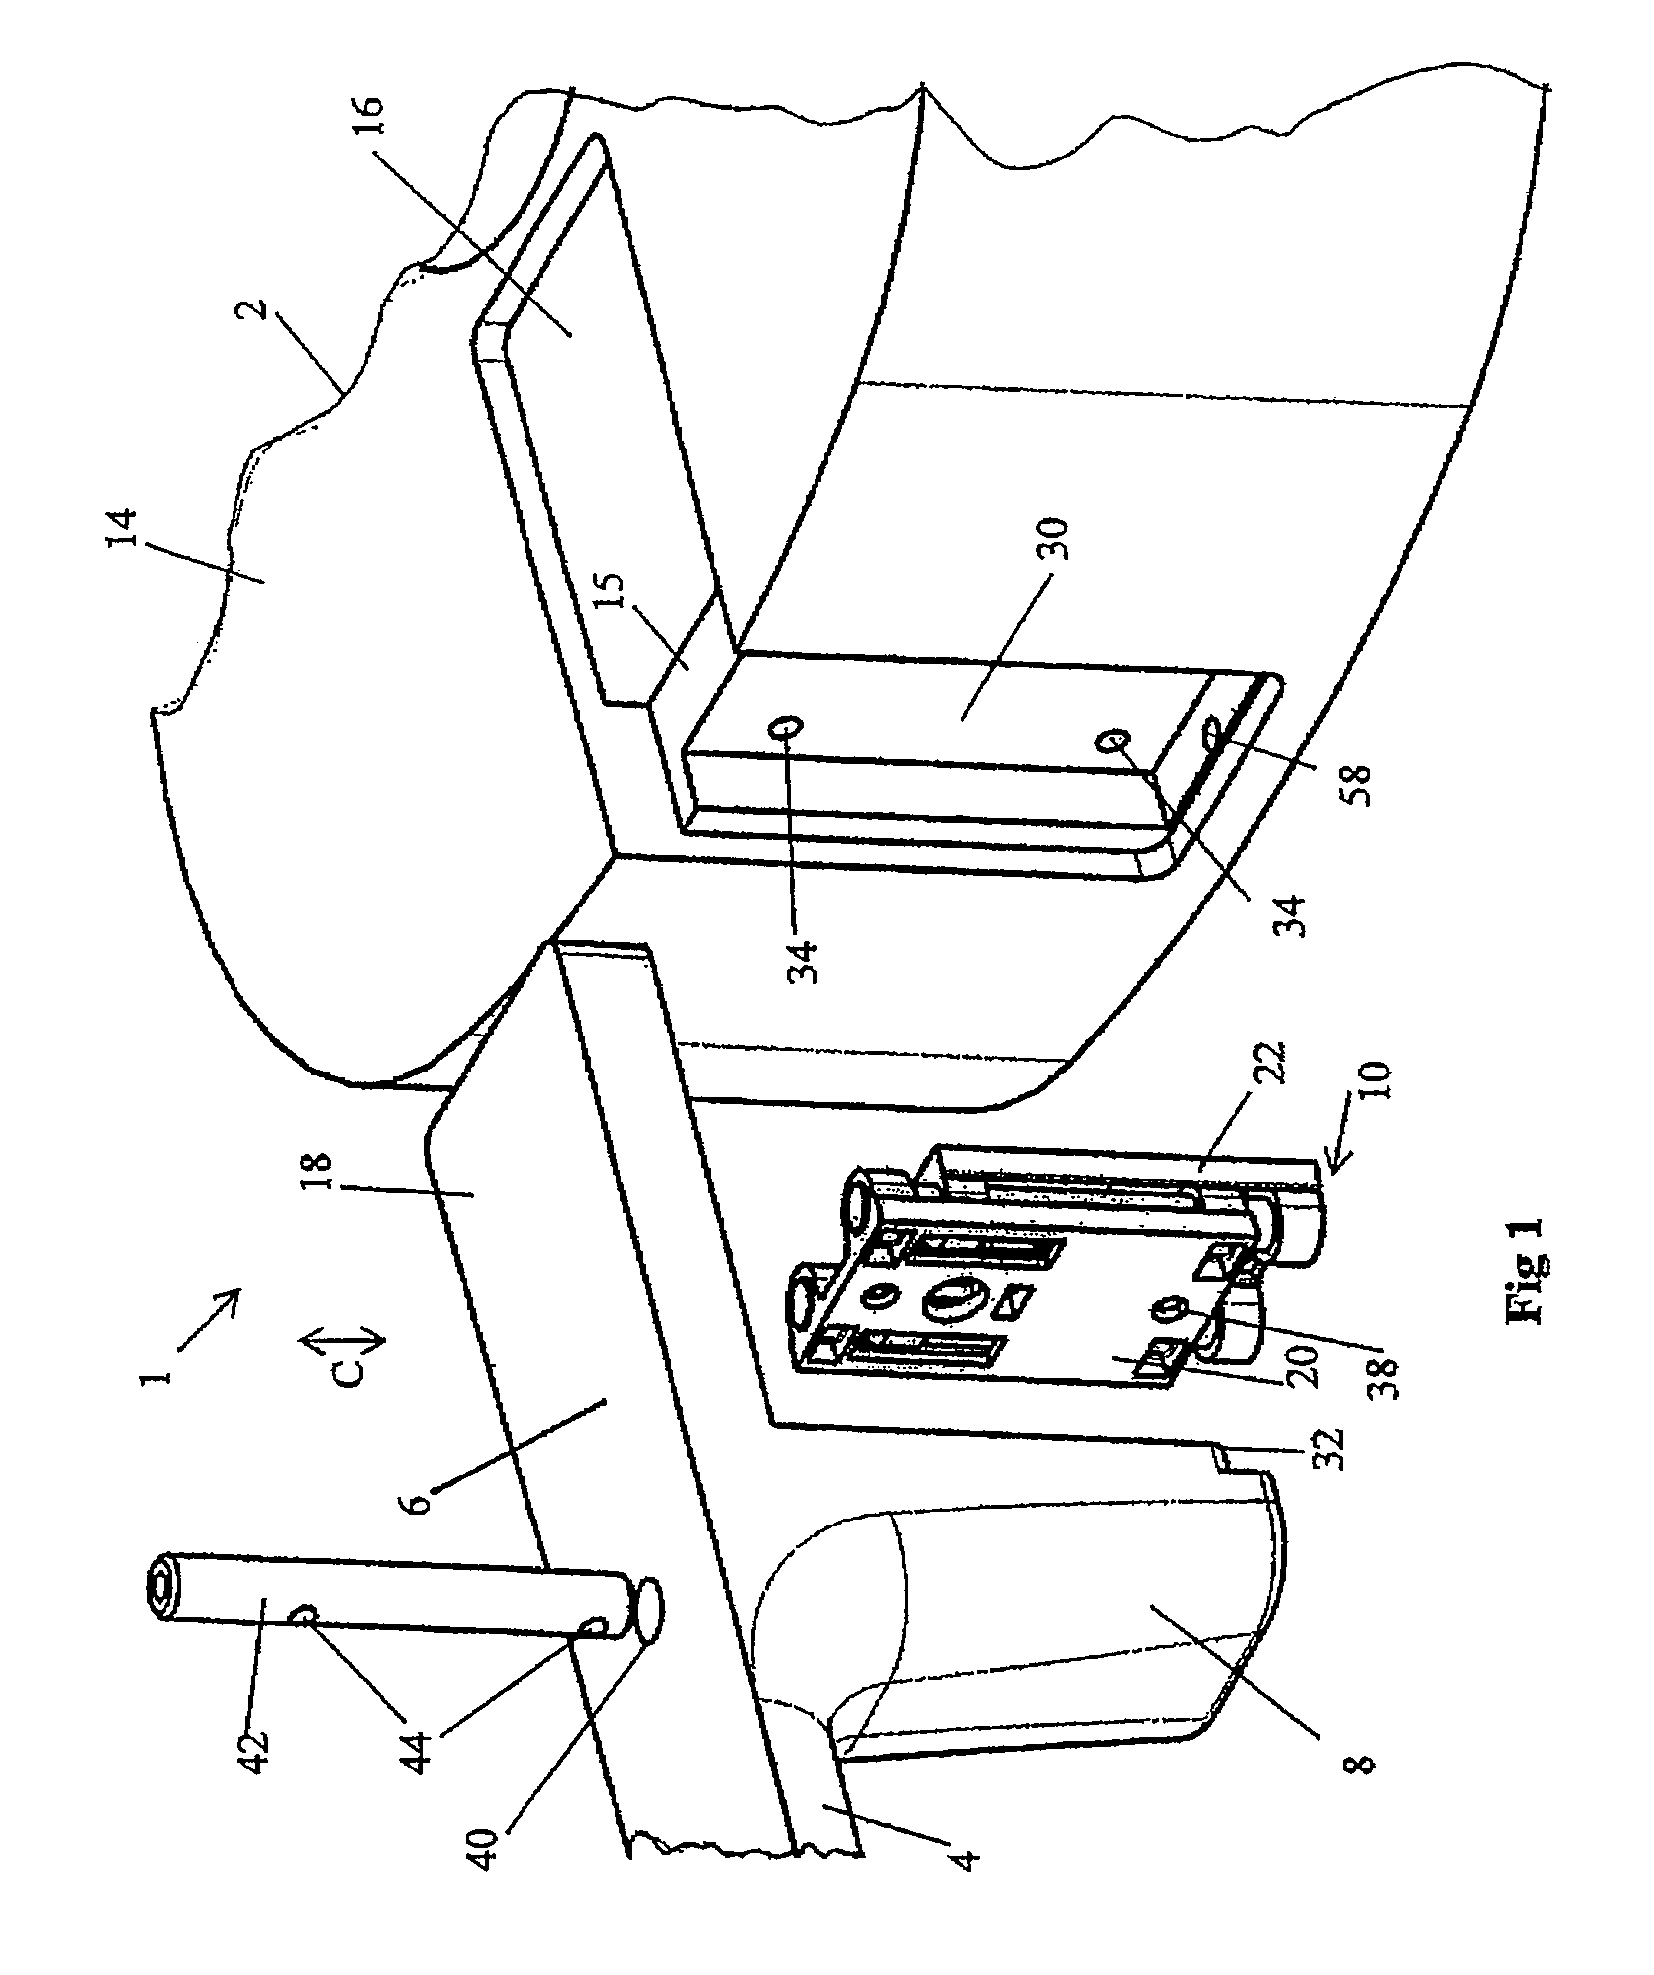 Adjustable neck mounting assembly for a stringed instrument